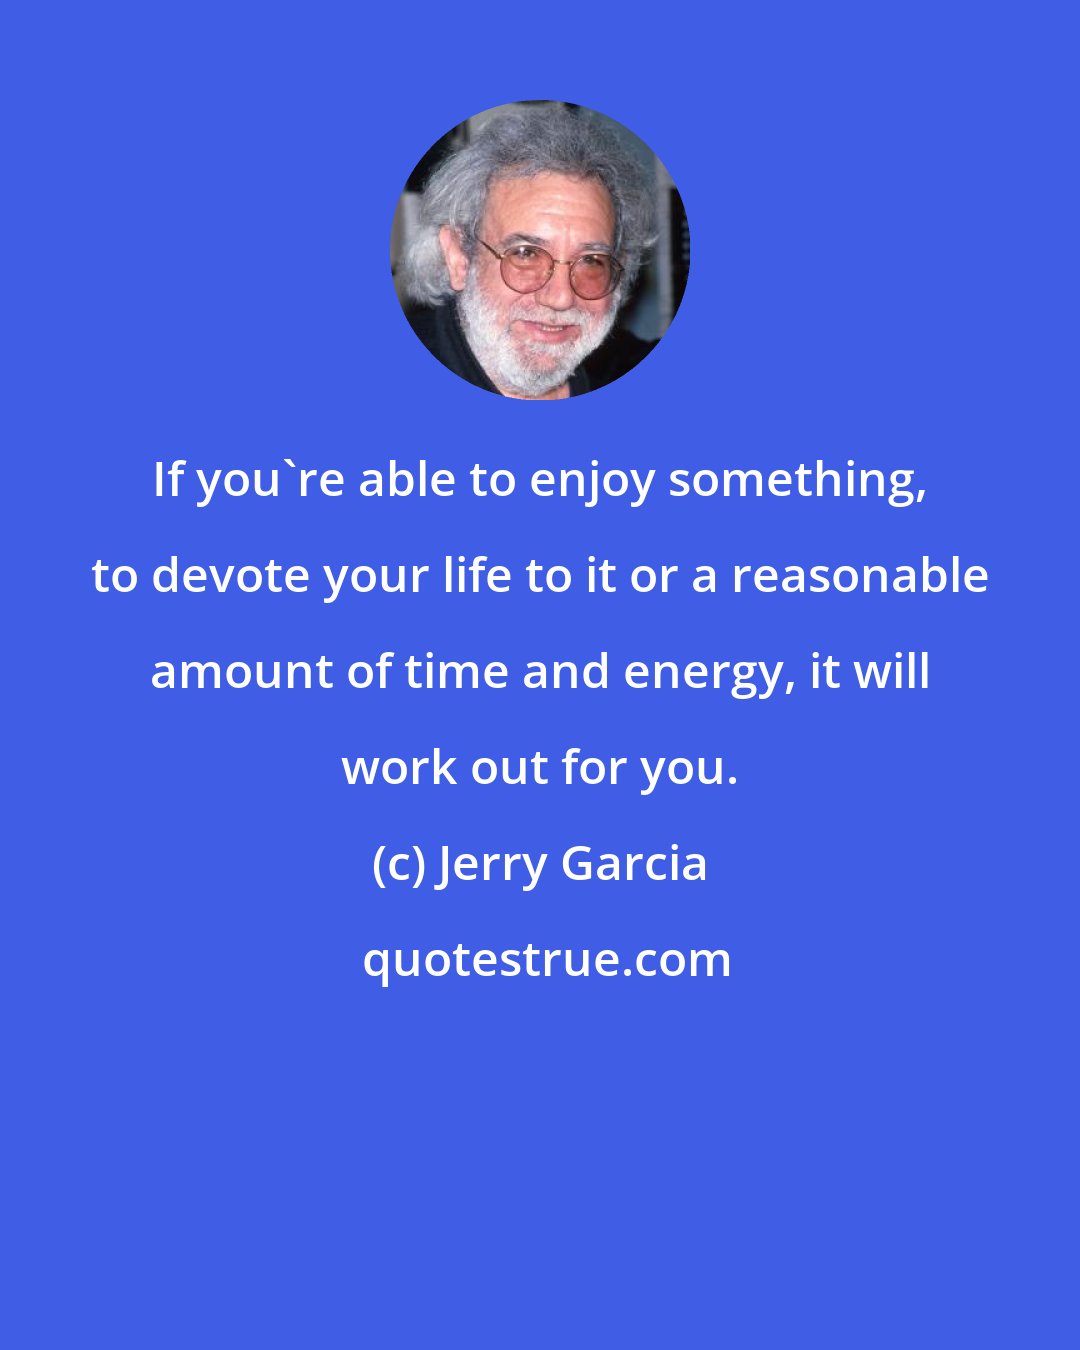 Jerry Garcia: If you're able to enjoy something, to devote your life to it or a reasonable amount of time and energy, it will work out for you.